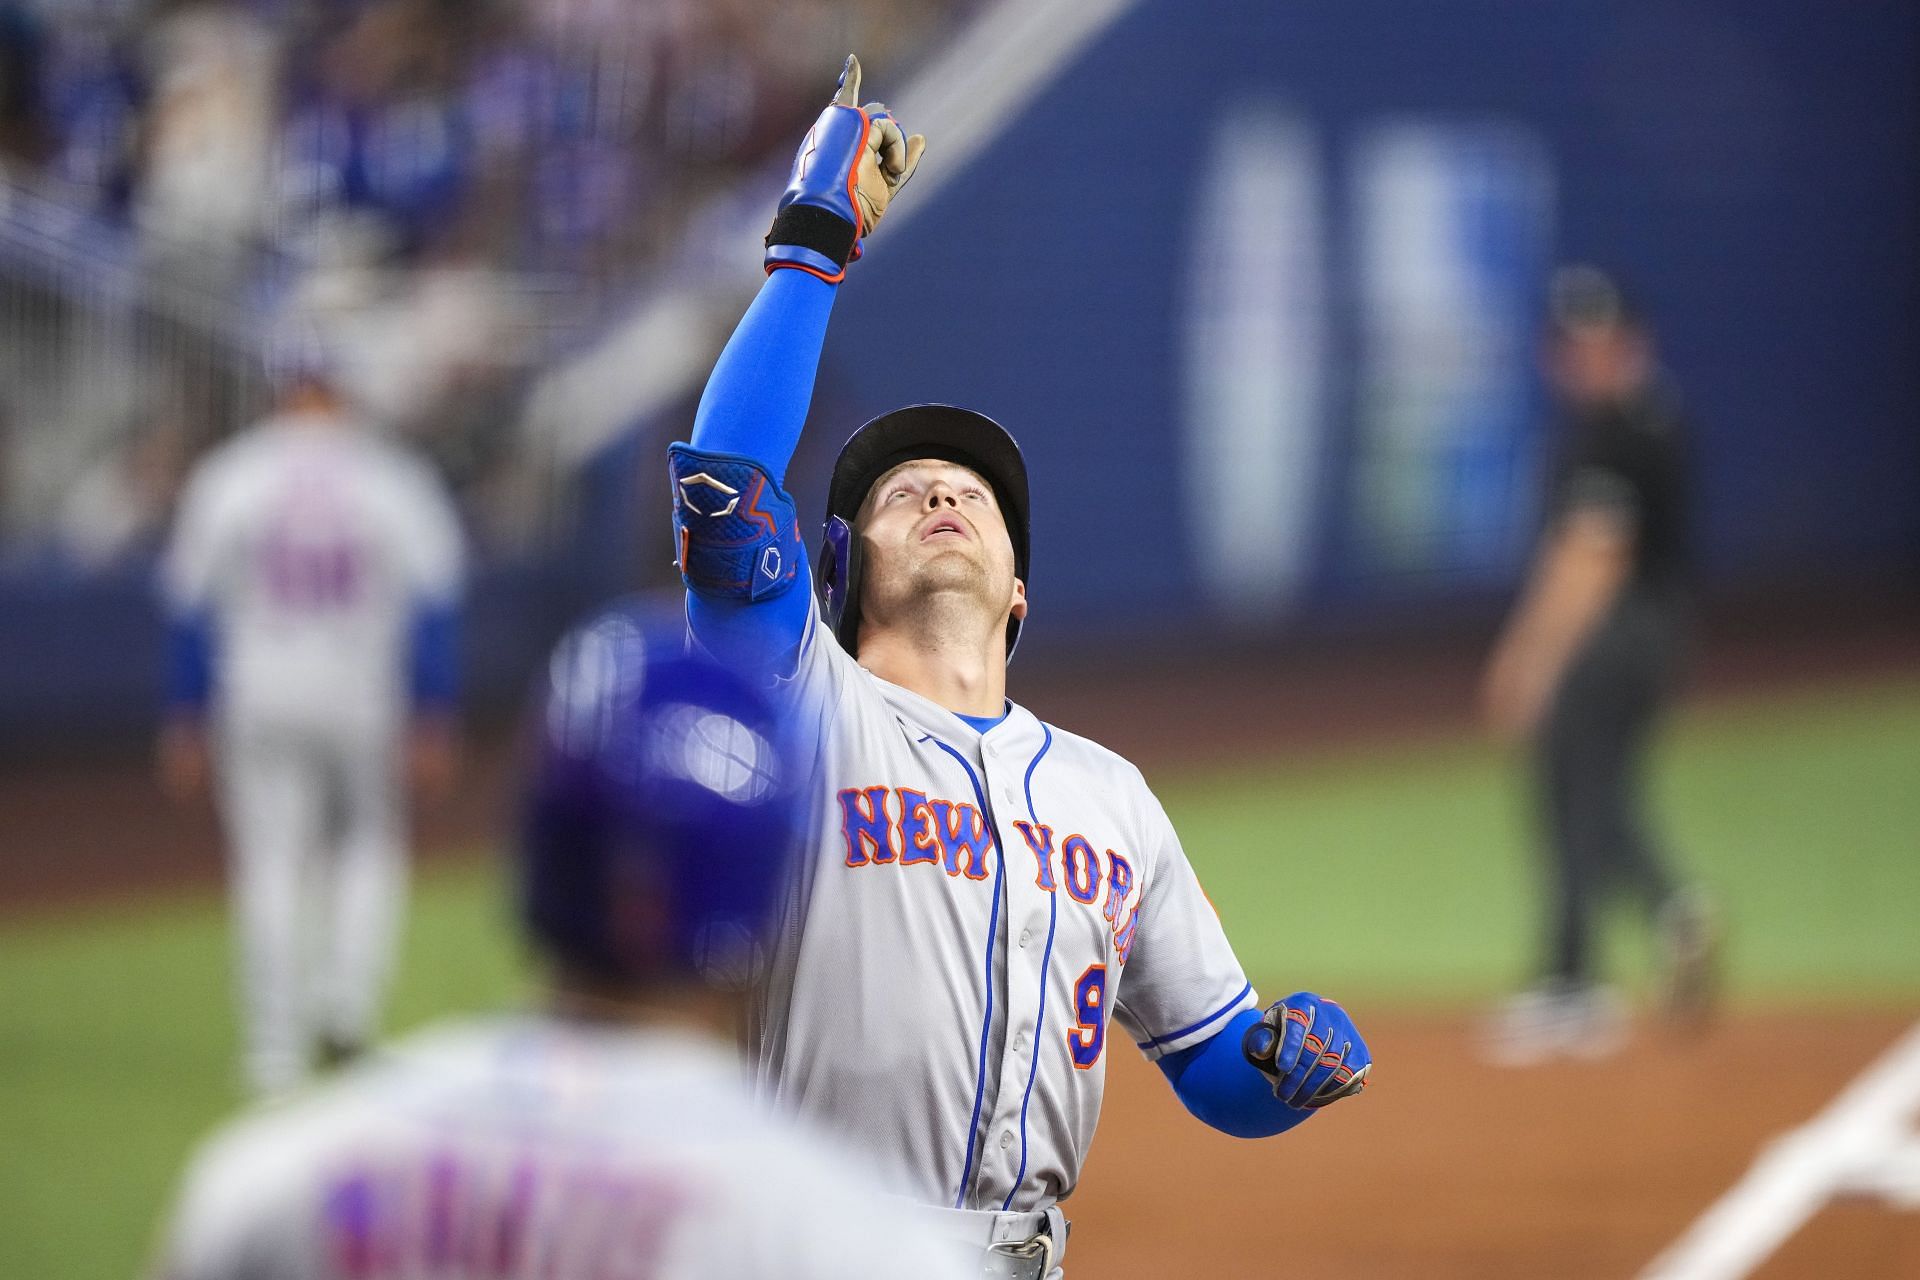 B-Mets' Brandon Nimmo carving a path to majors